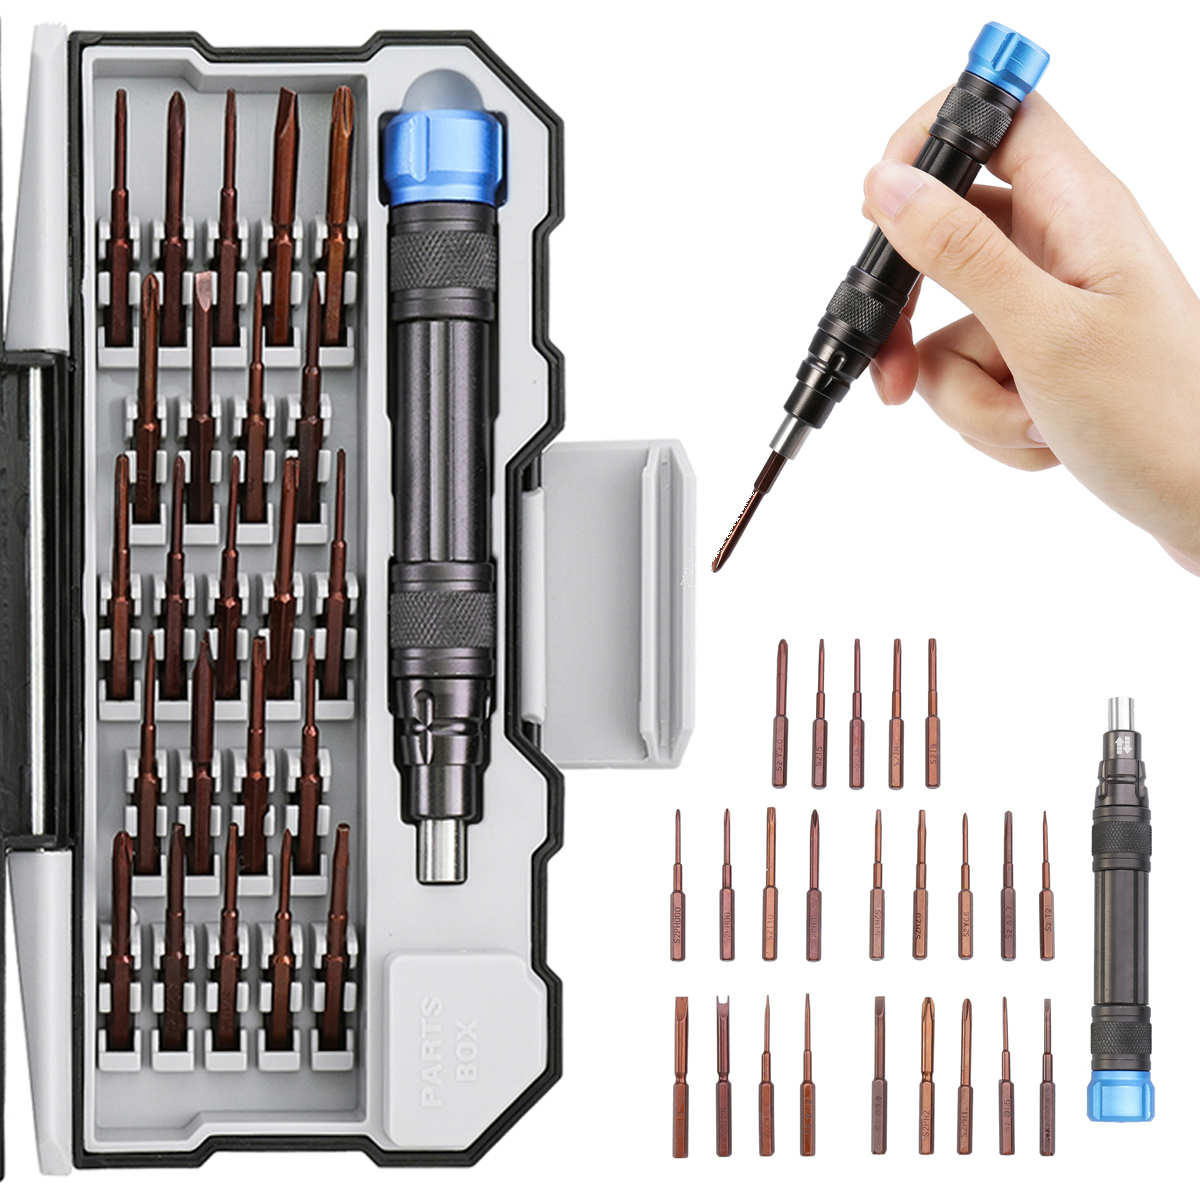 Baban-24-In-1-Precision-Screwdriver-Set-Screwdriver-Combination-For-iPhone-Computer-Notebook-Disasse-1960898-2